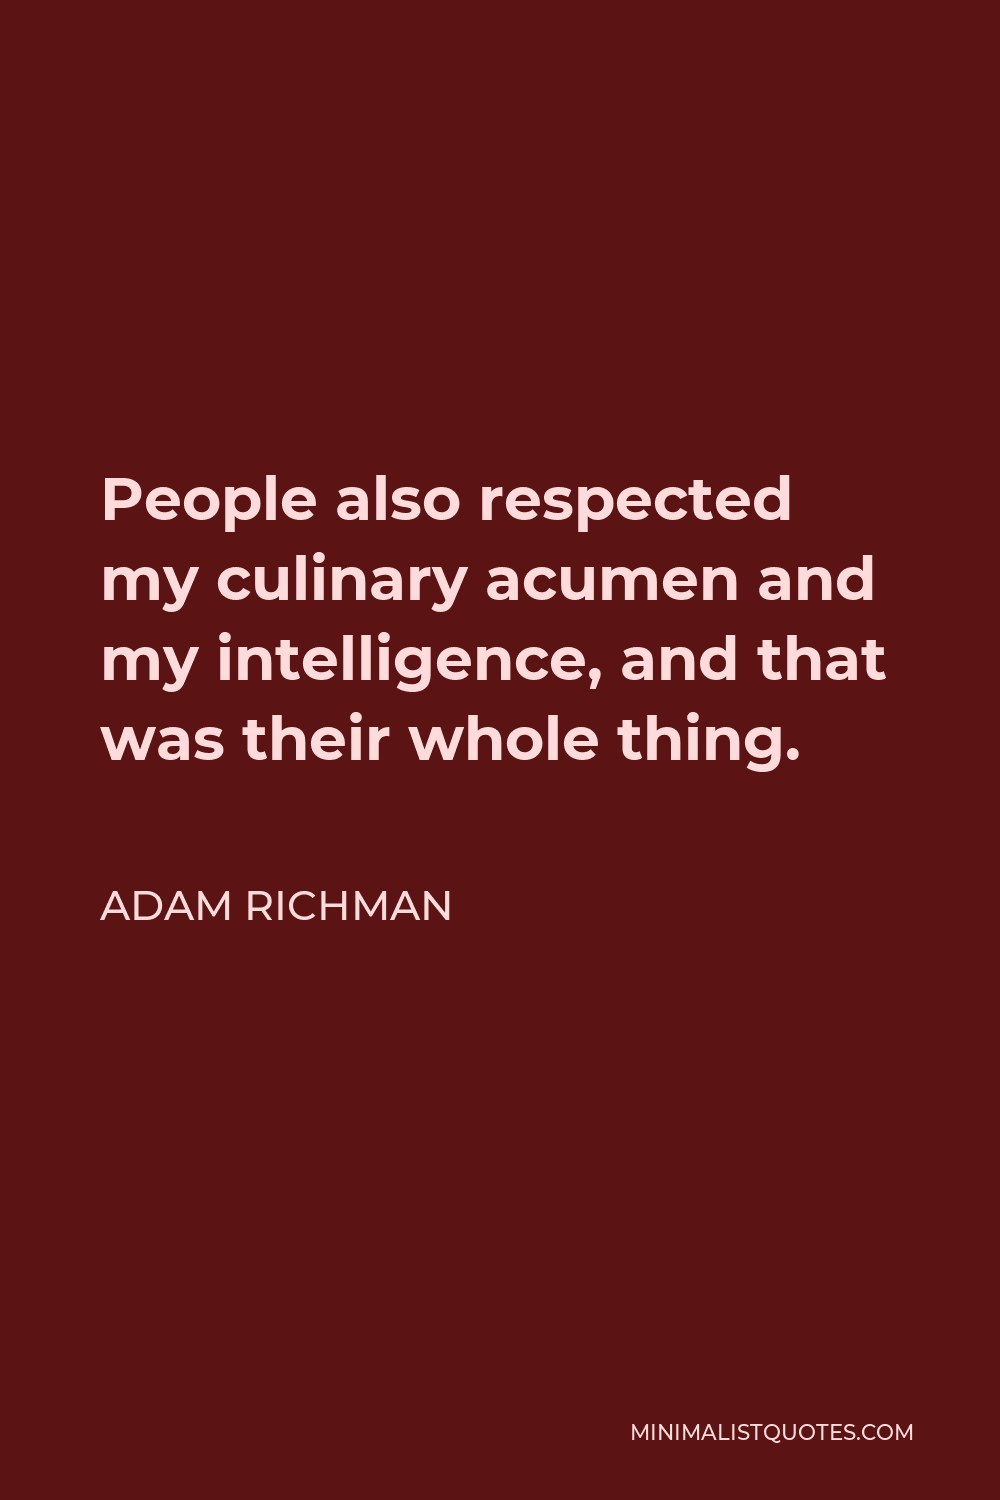 Adam Richman Quote - People also respected my culinary acumen and my intelligence, and that was their whole thing.